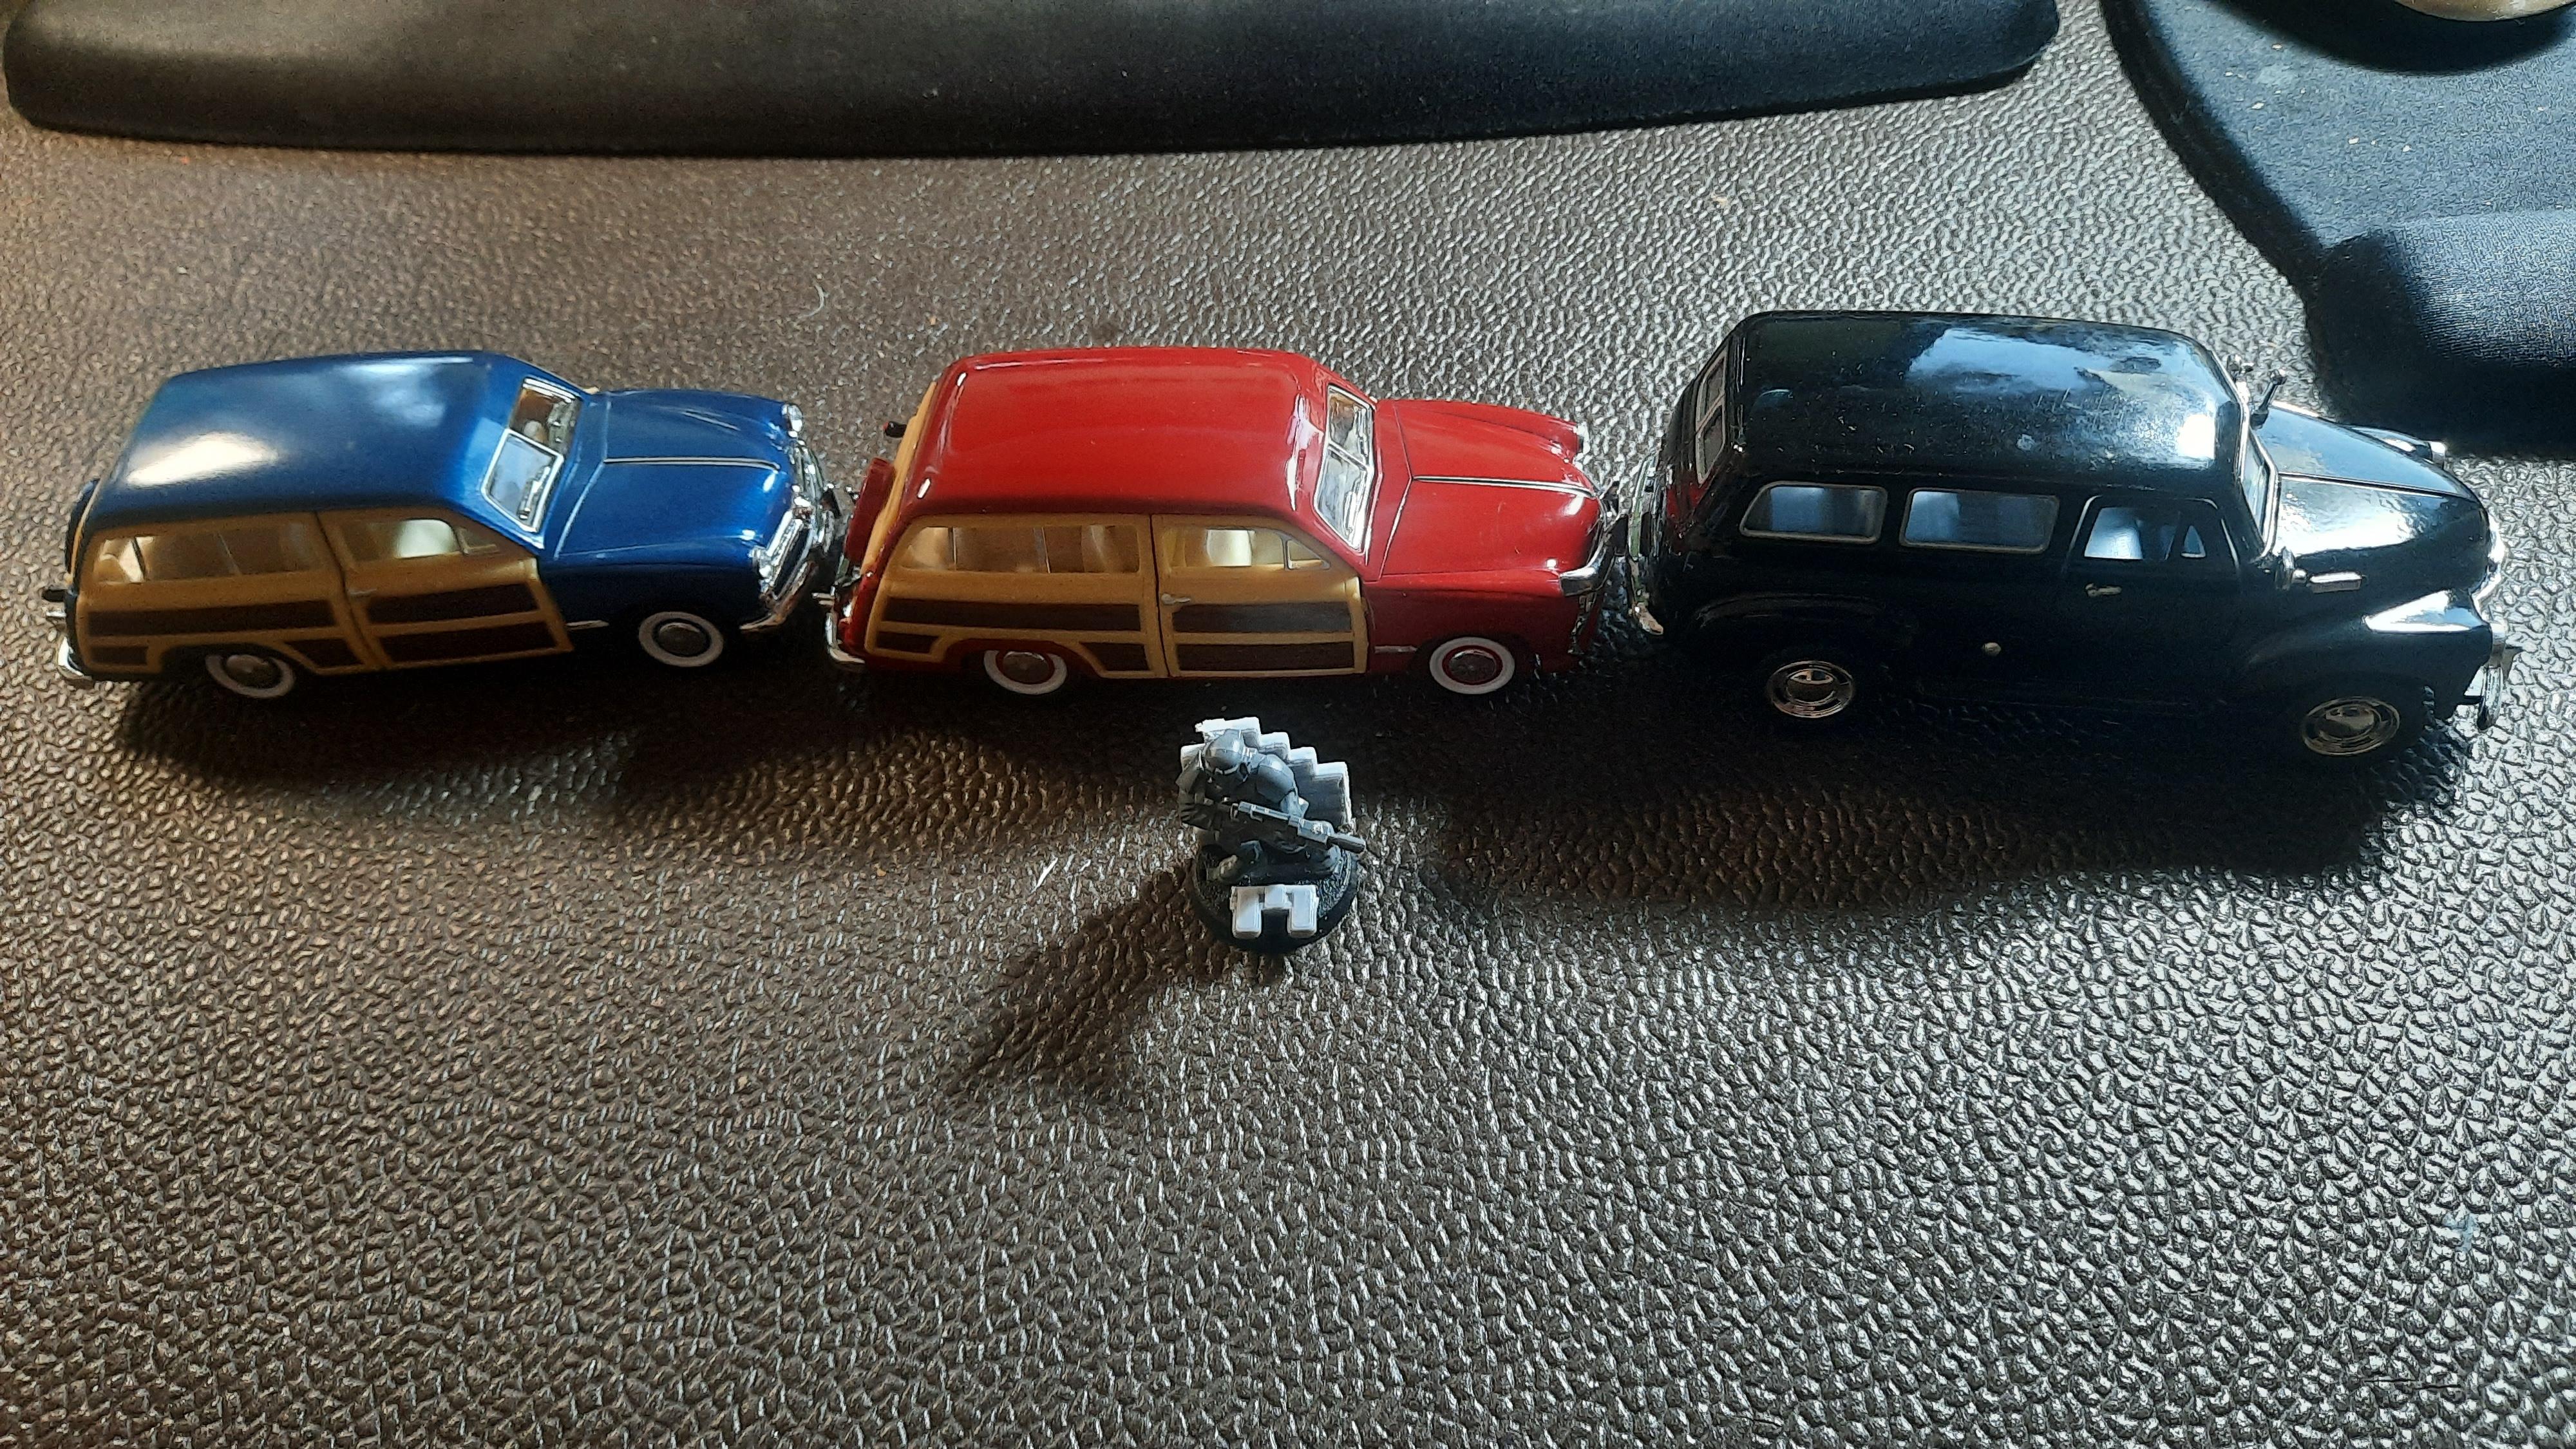 Cars, Toy